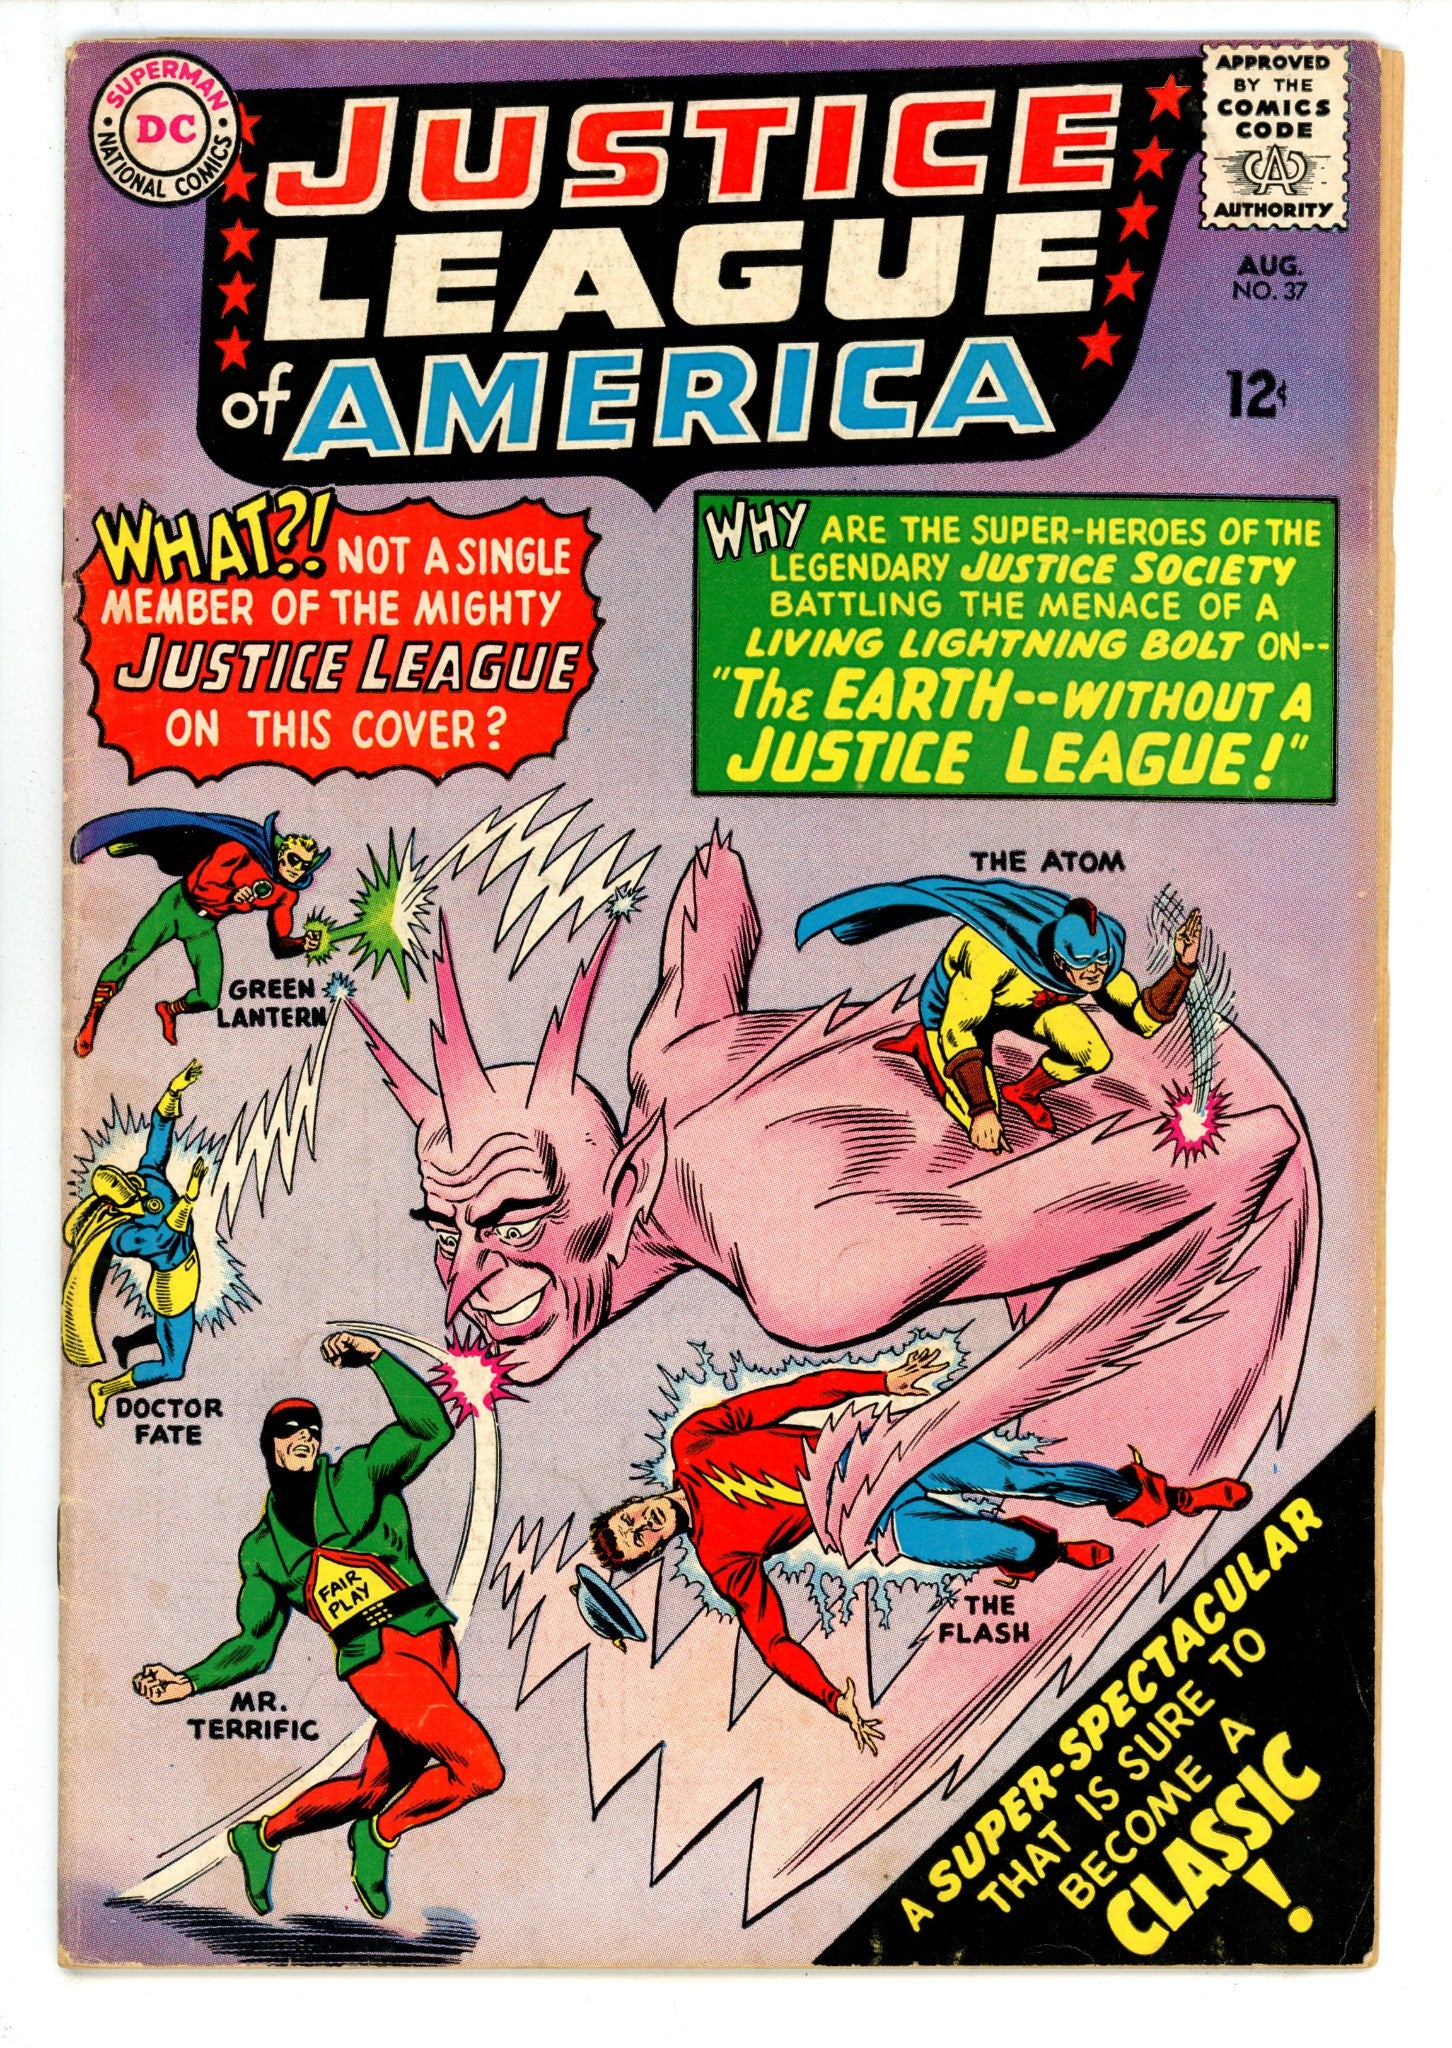 Justice League of America Vol 1 37 VG/FN (5.0) (1965) 